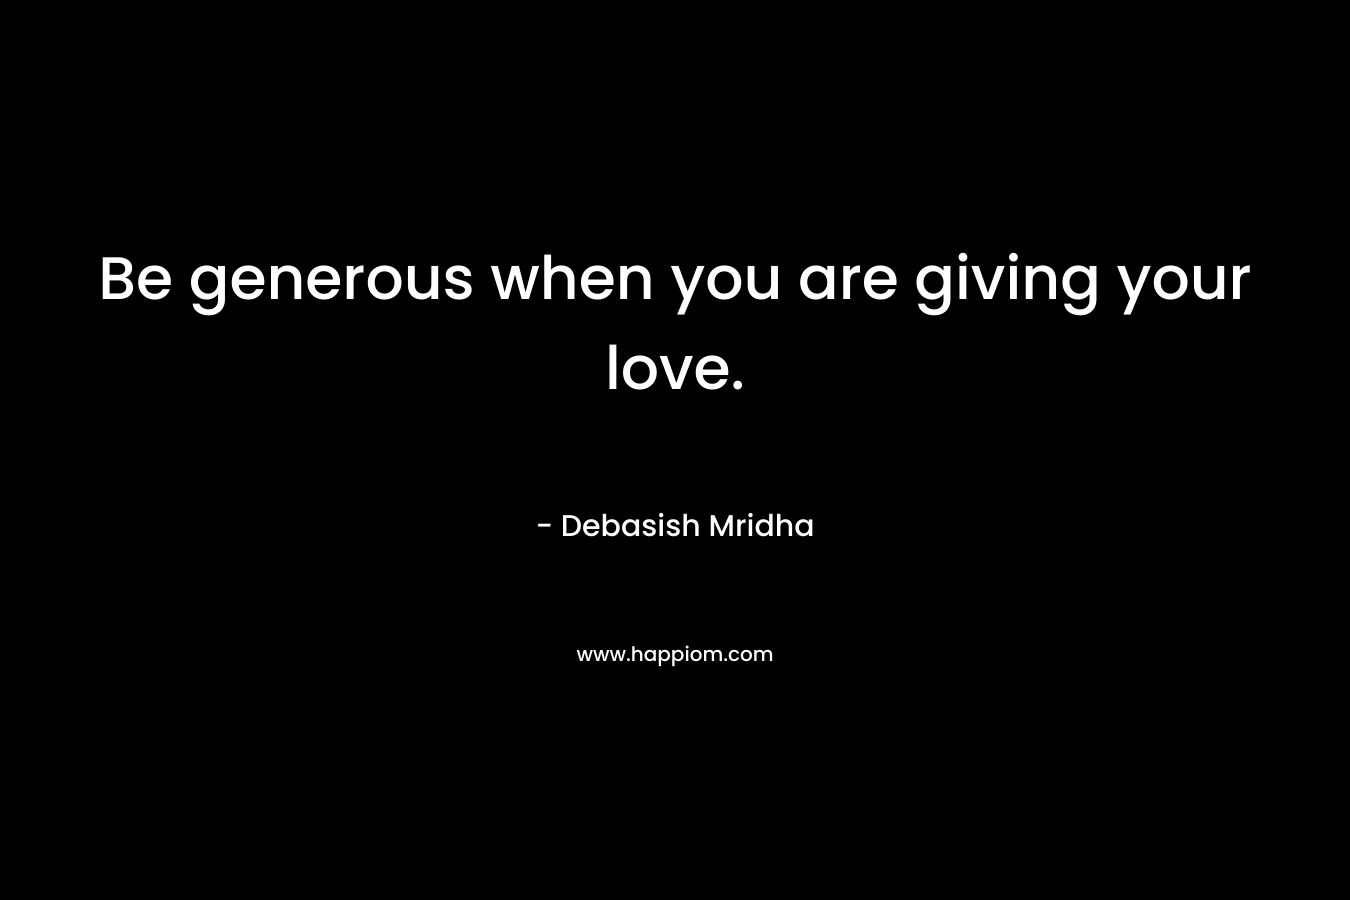 Be generous when you are giving your love.